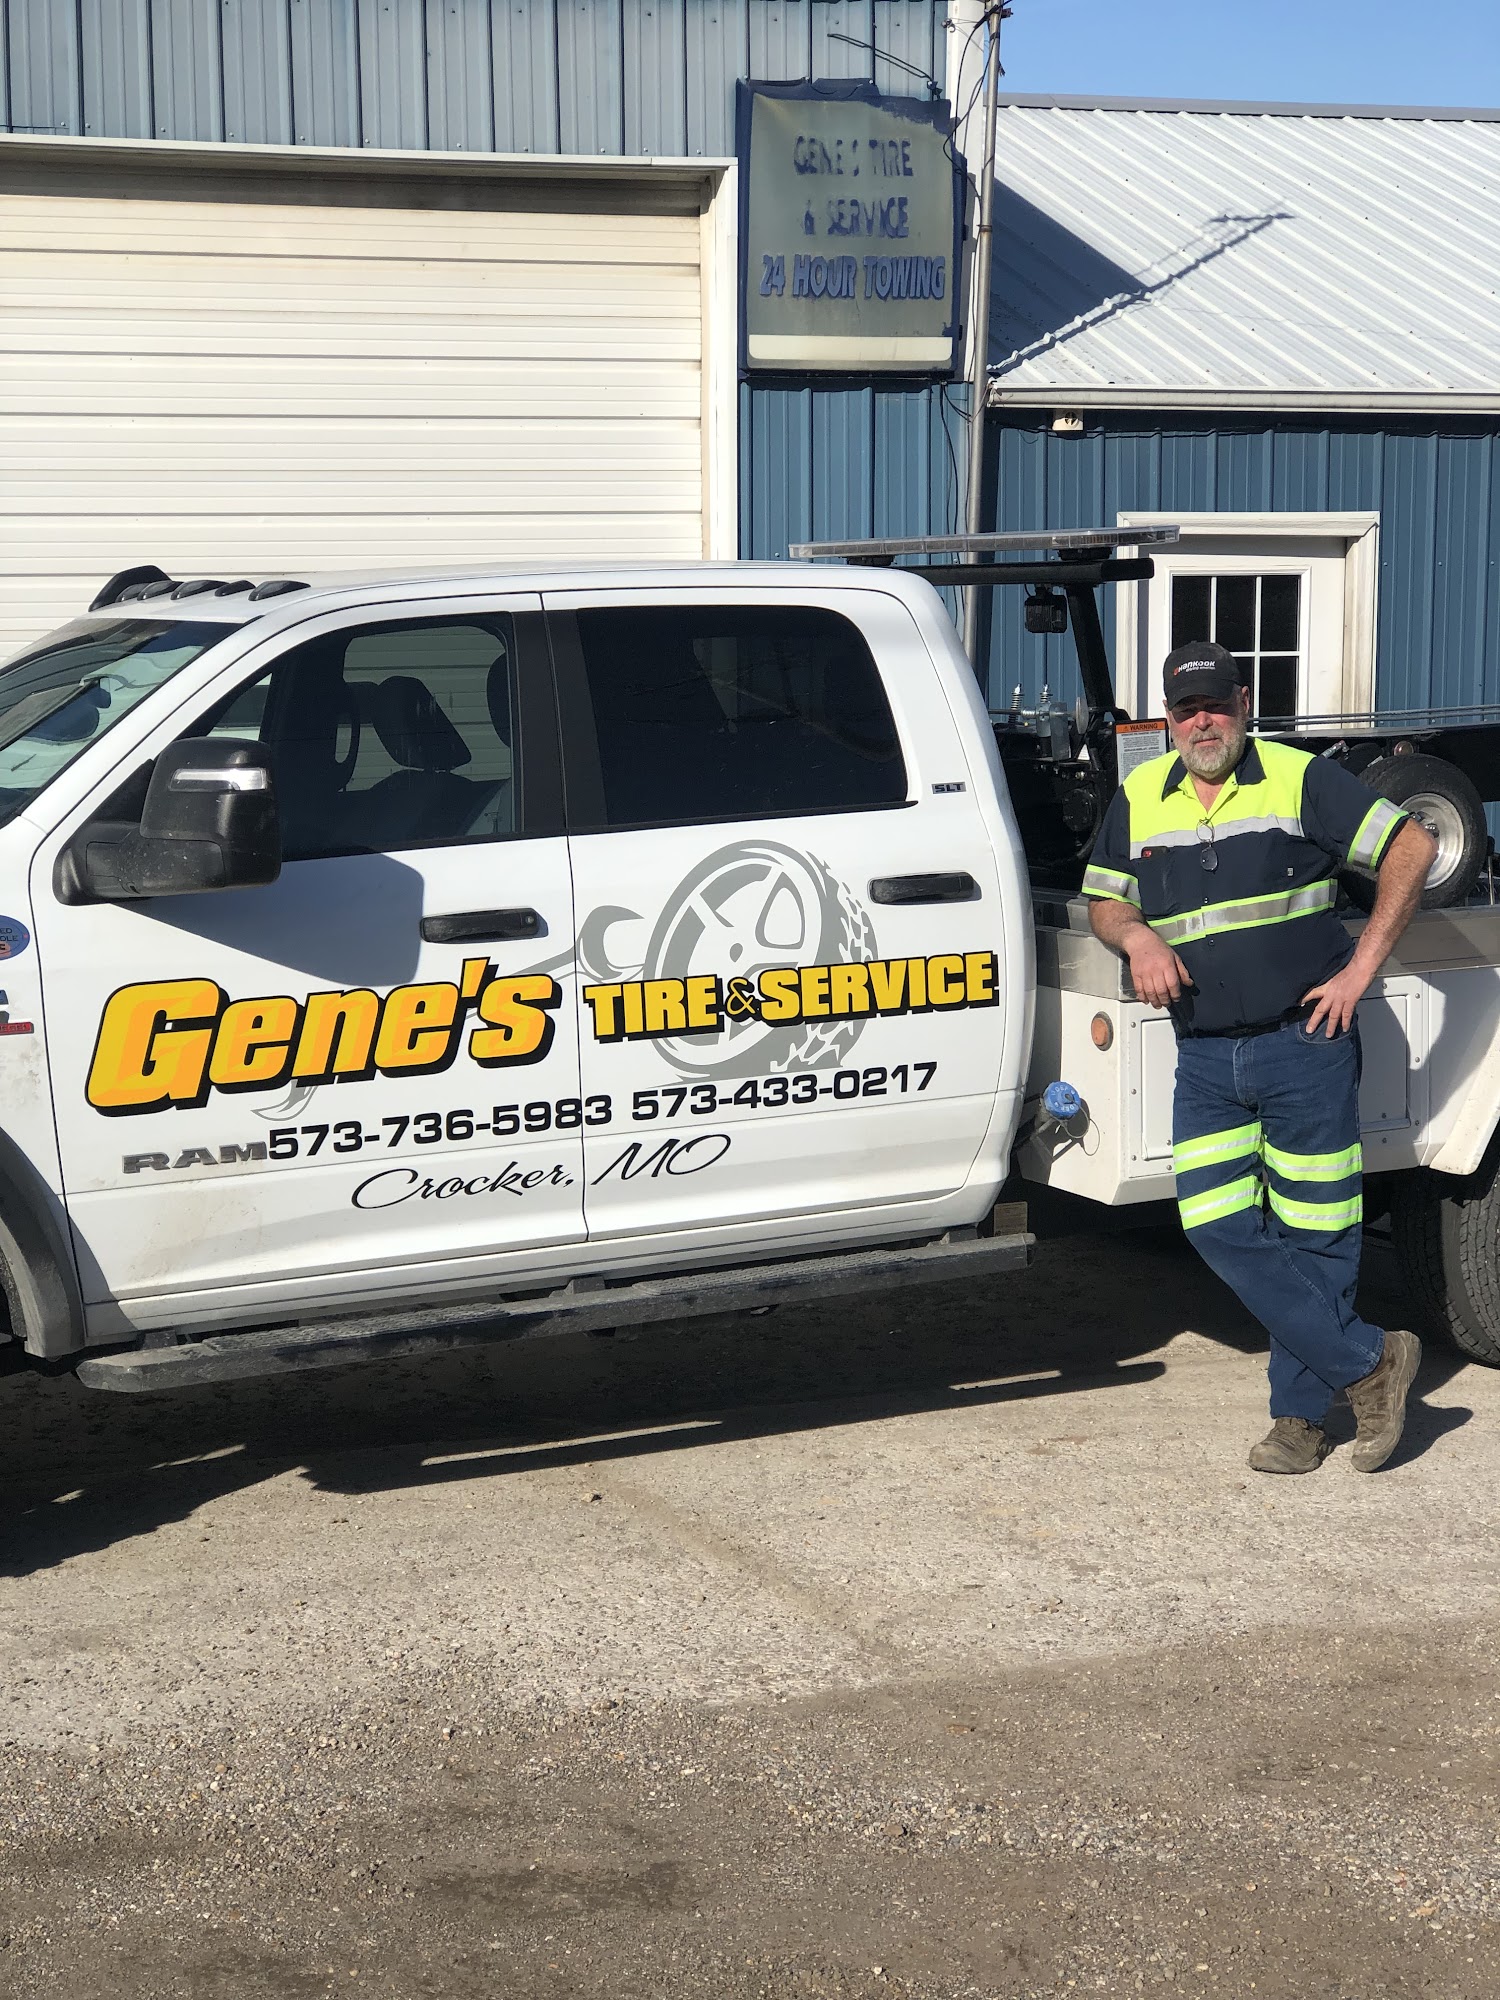 Gene's Tire & Service Towing